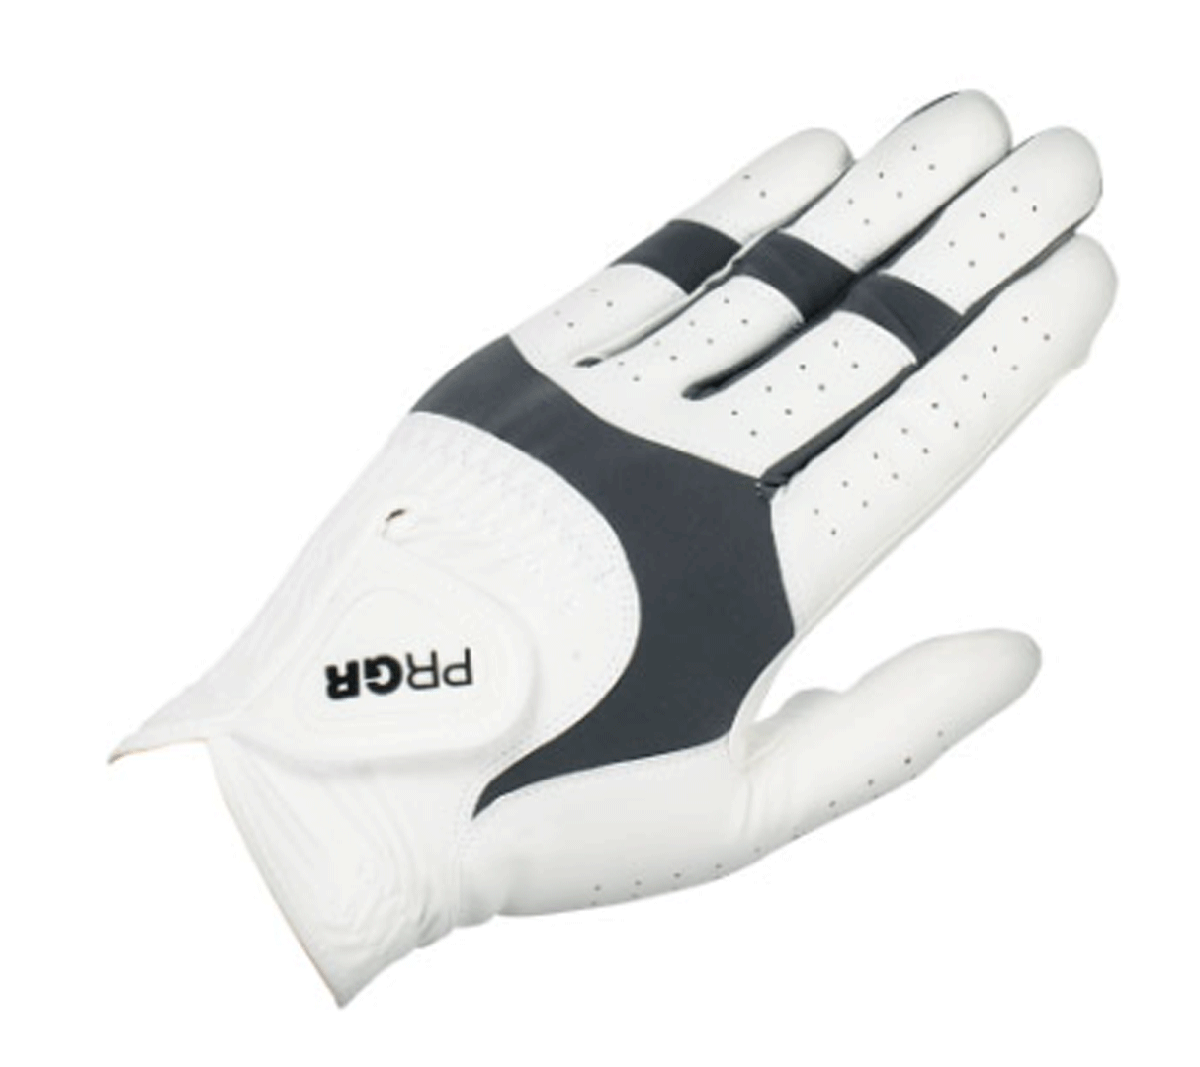  new goods # free shipping # PRGR # high * grip * hand glove #PG-319# white #25CM#3 pieces set # anyway ... not!# regular goods 